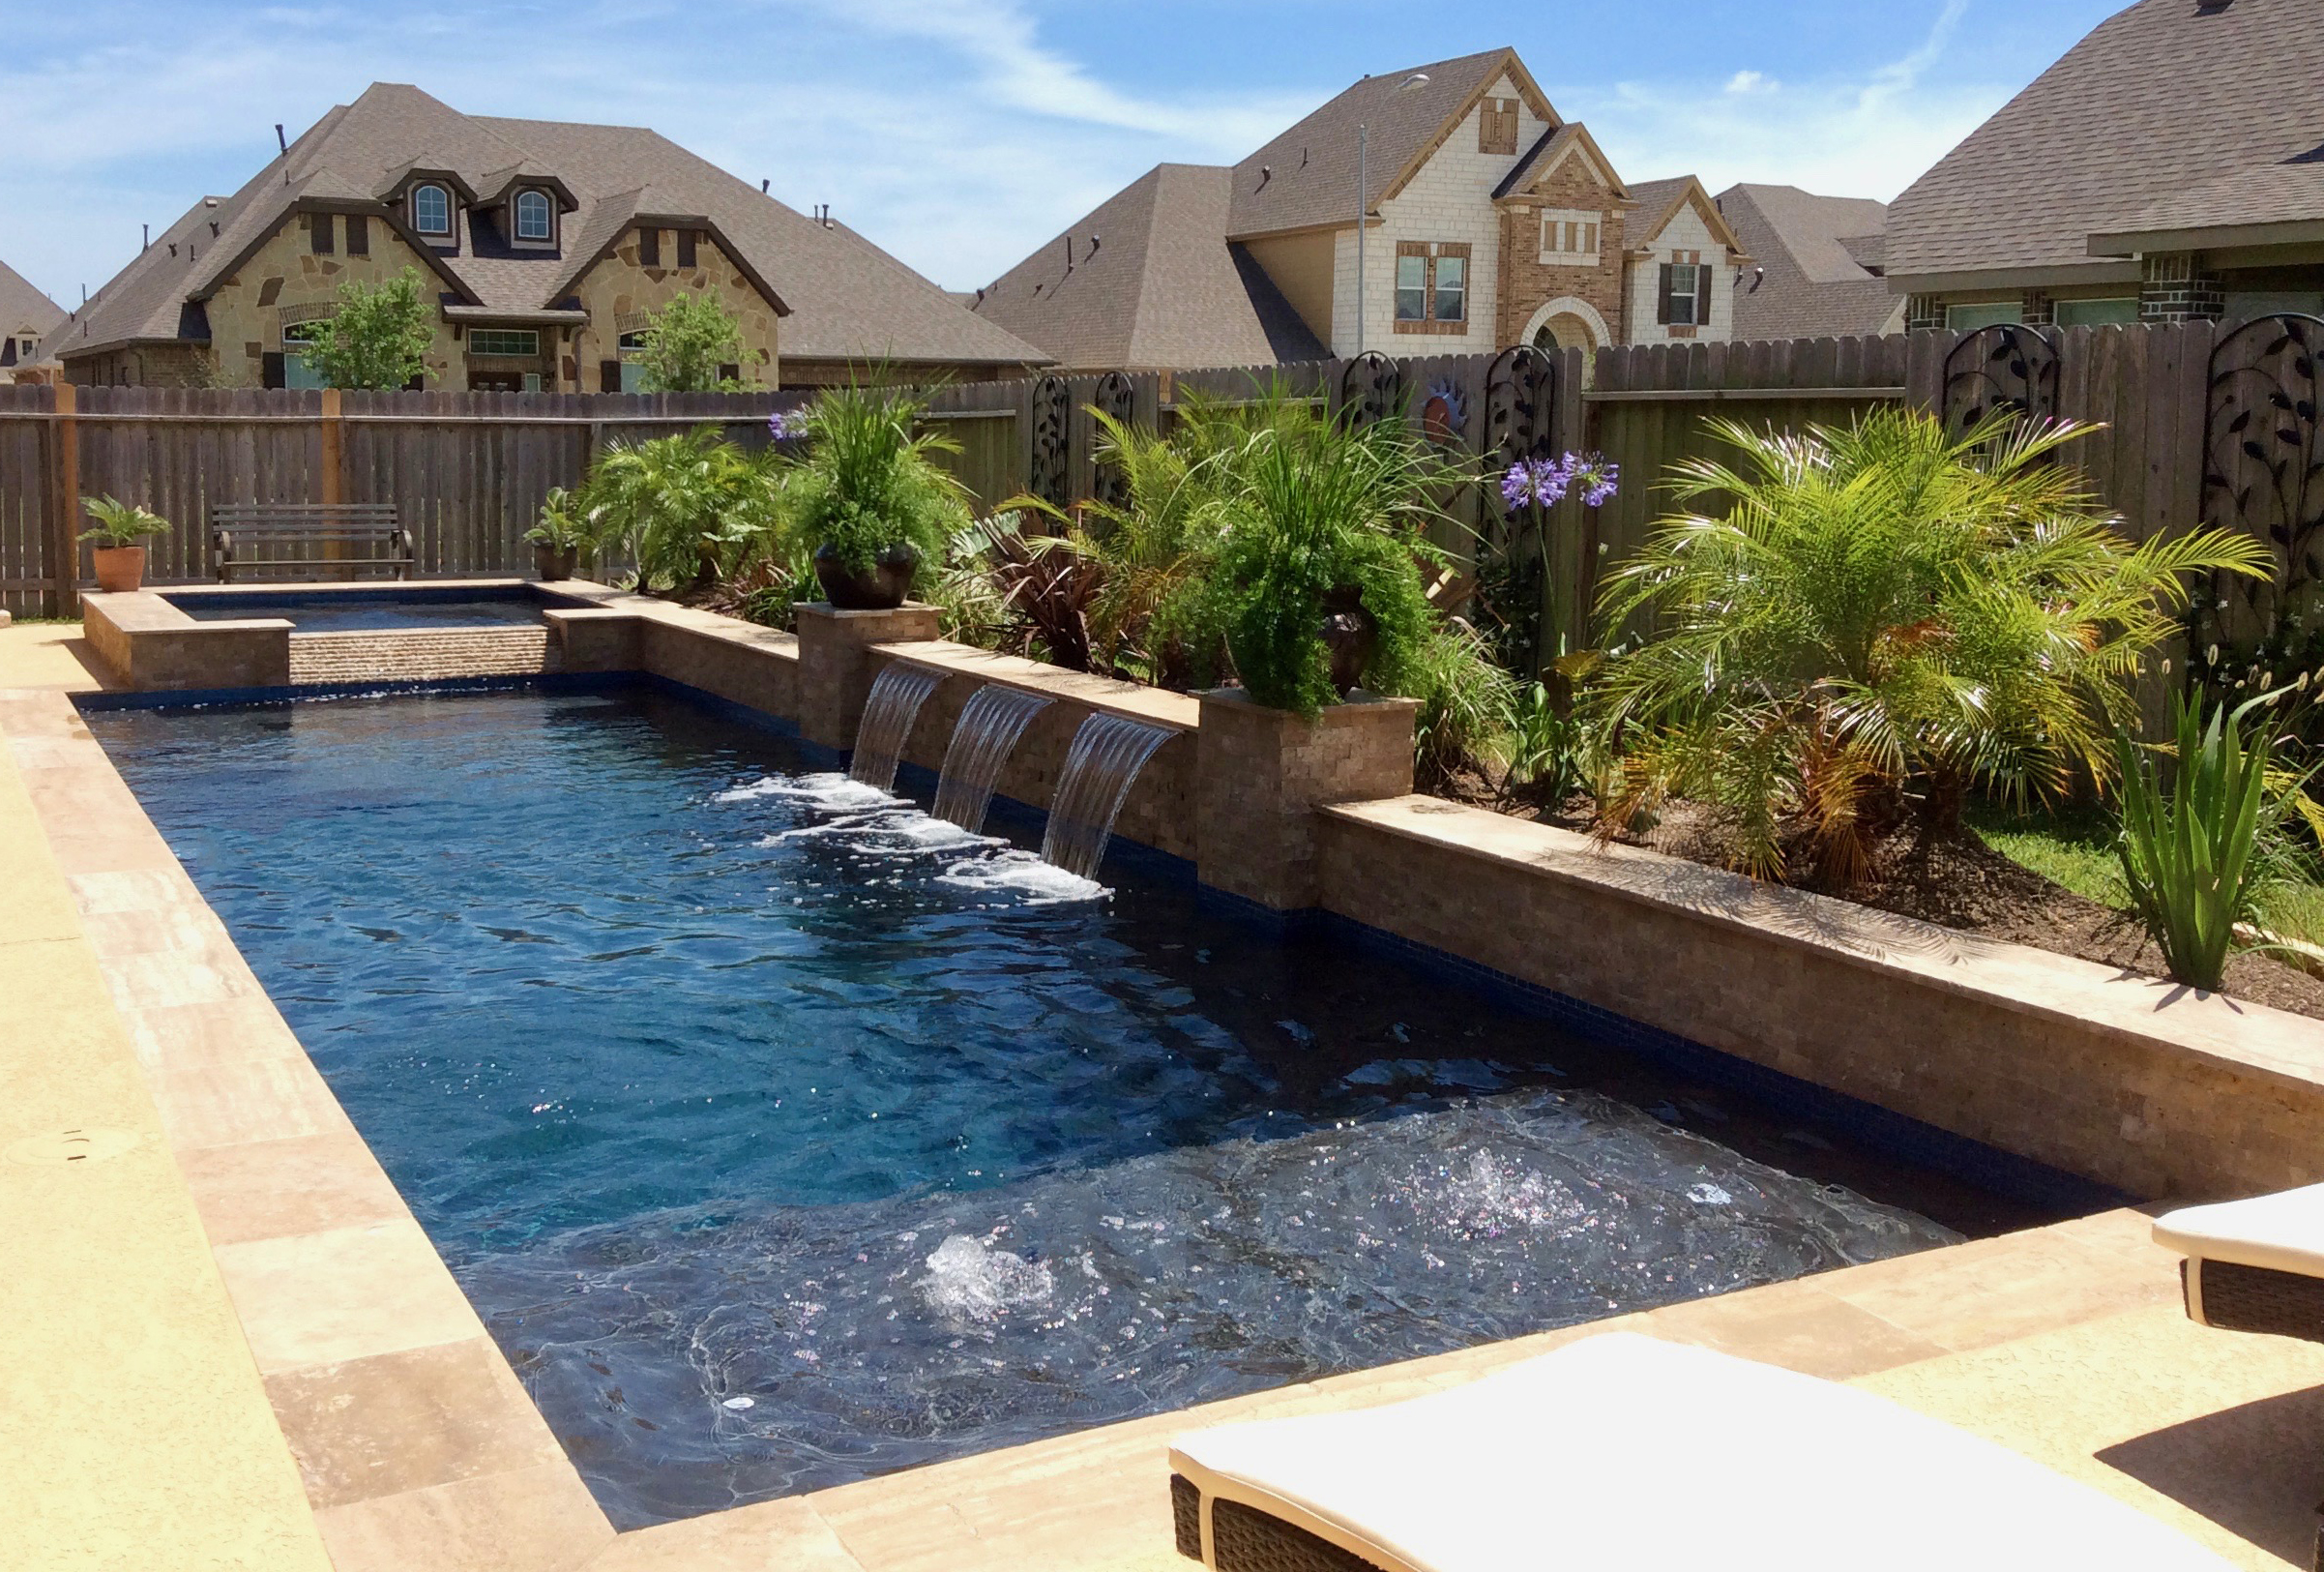 Let Experienced Swimming Pool Installation Services Transform Your Outdoor Space into an Oasis in Florida